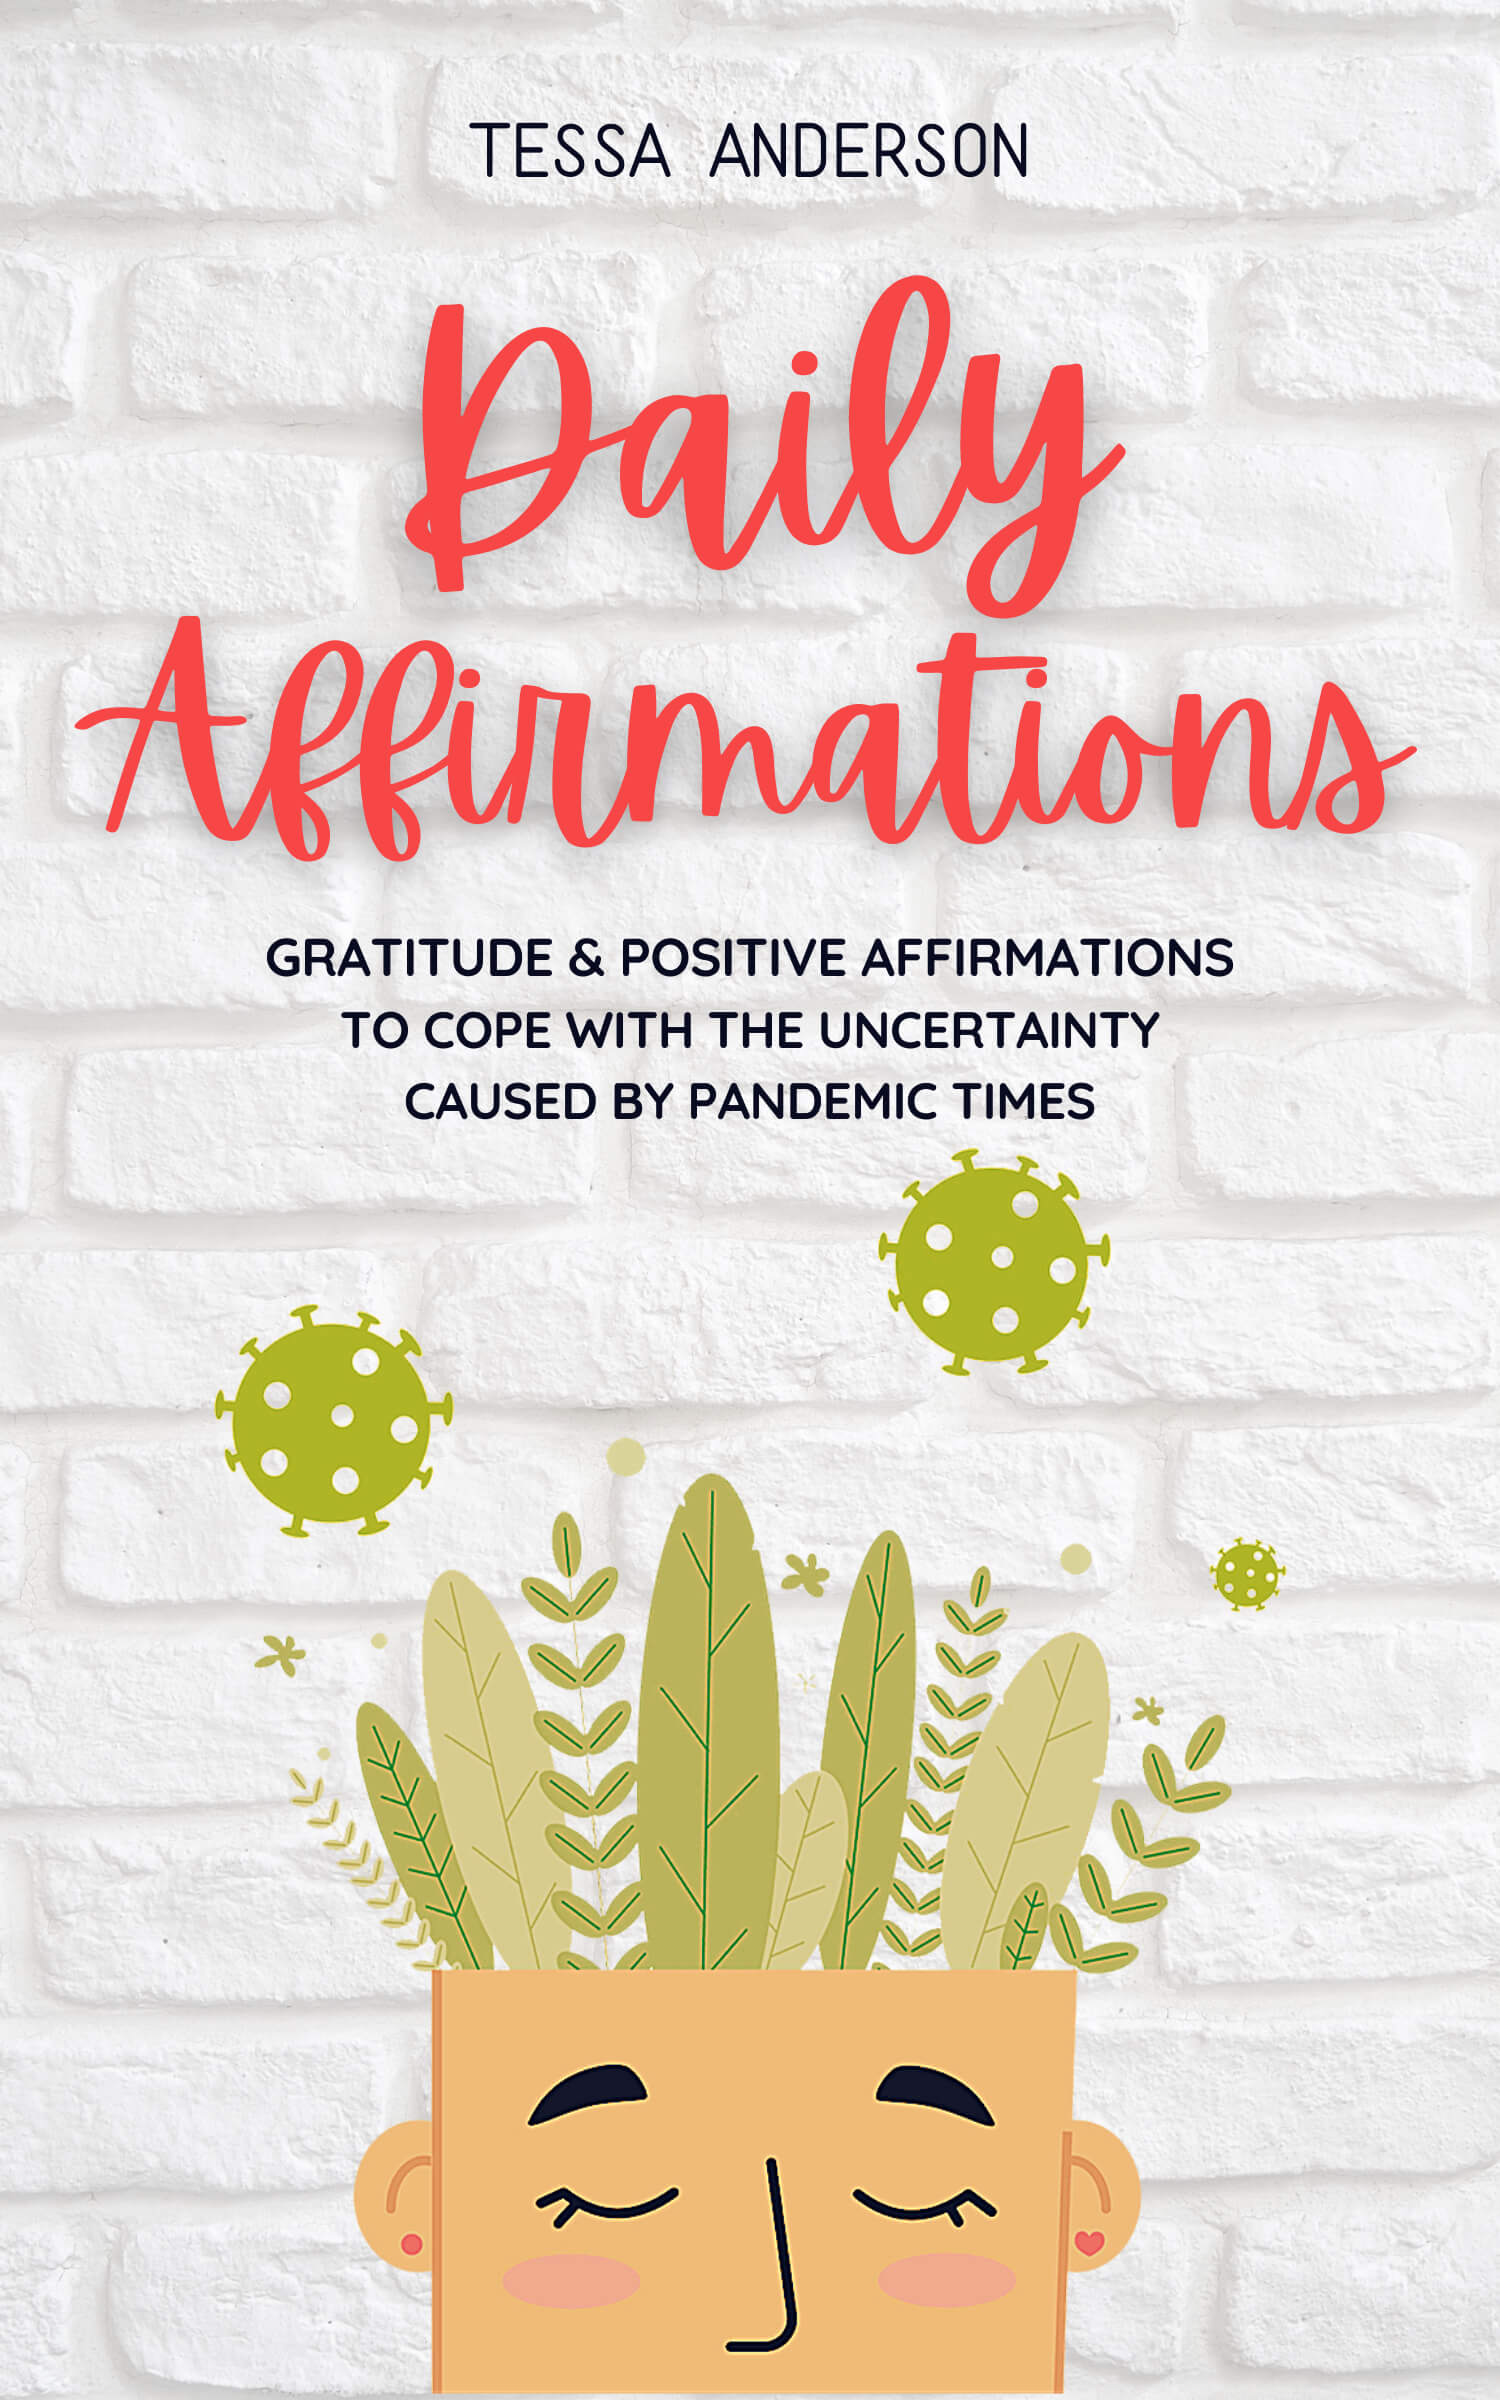 FREE: Daily Affirmations: Gratitude & Positive Affirmations to Cope With the Uncertainty Caused by Pandemic Times by Tessa Anderson